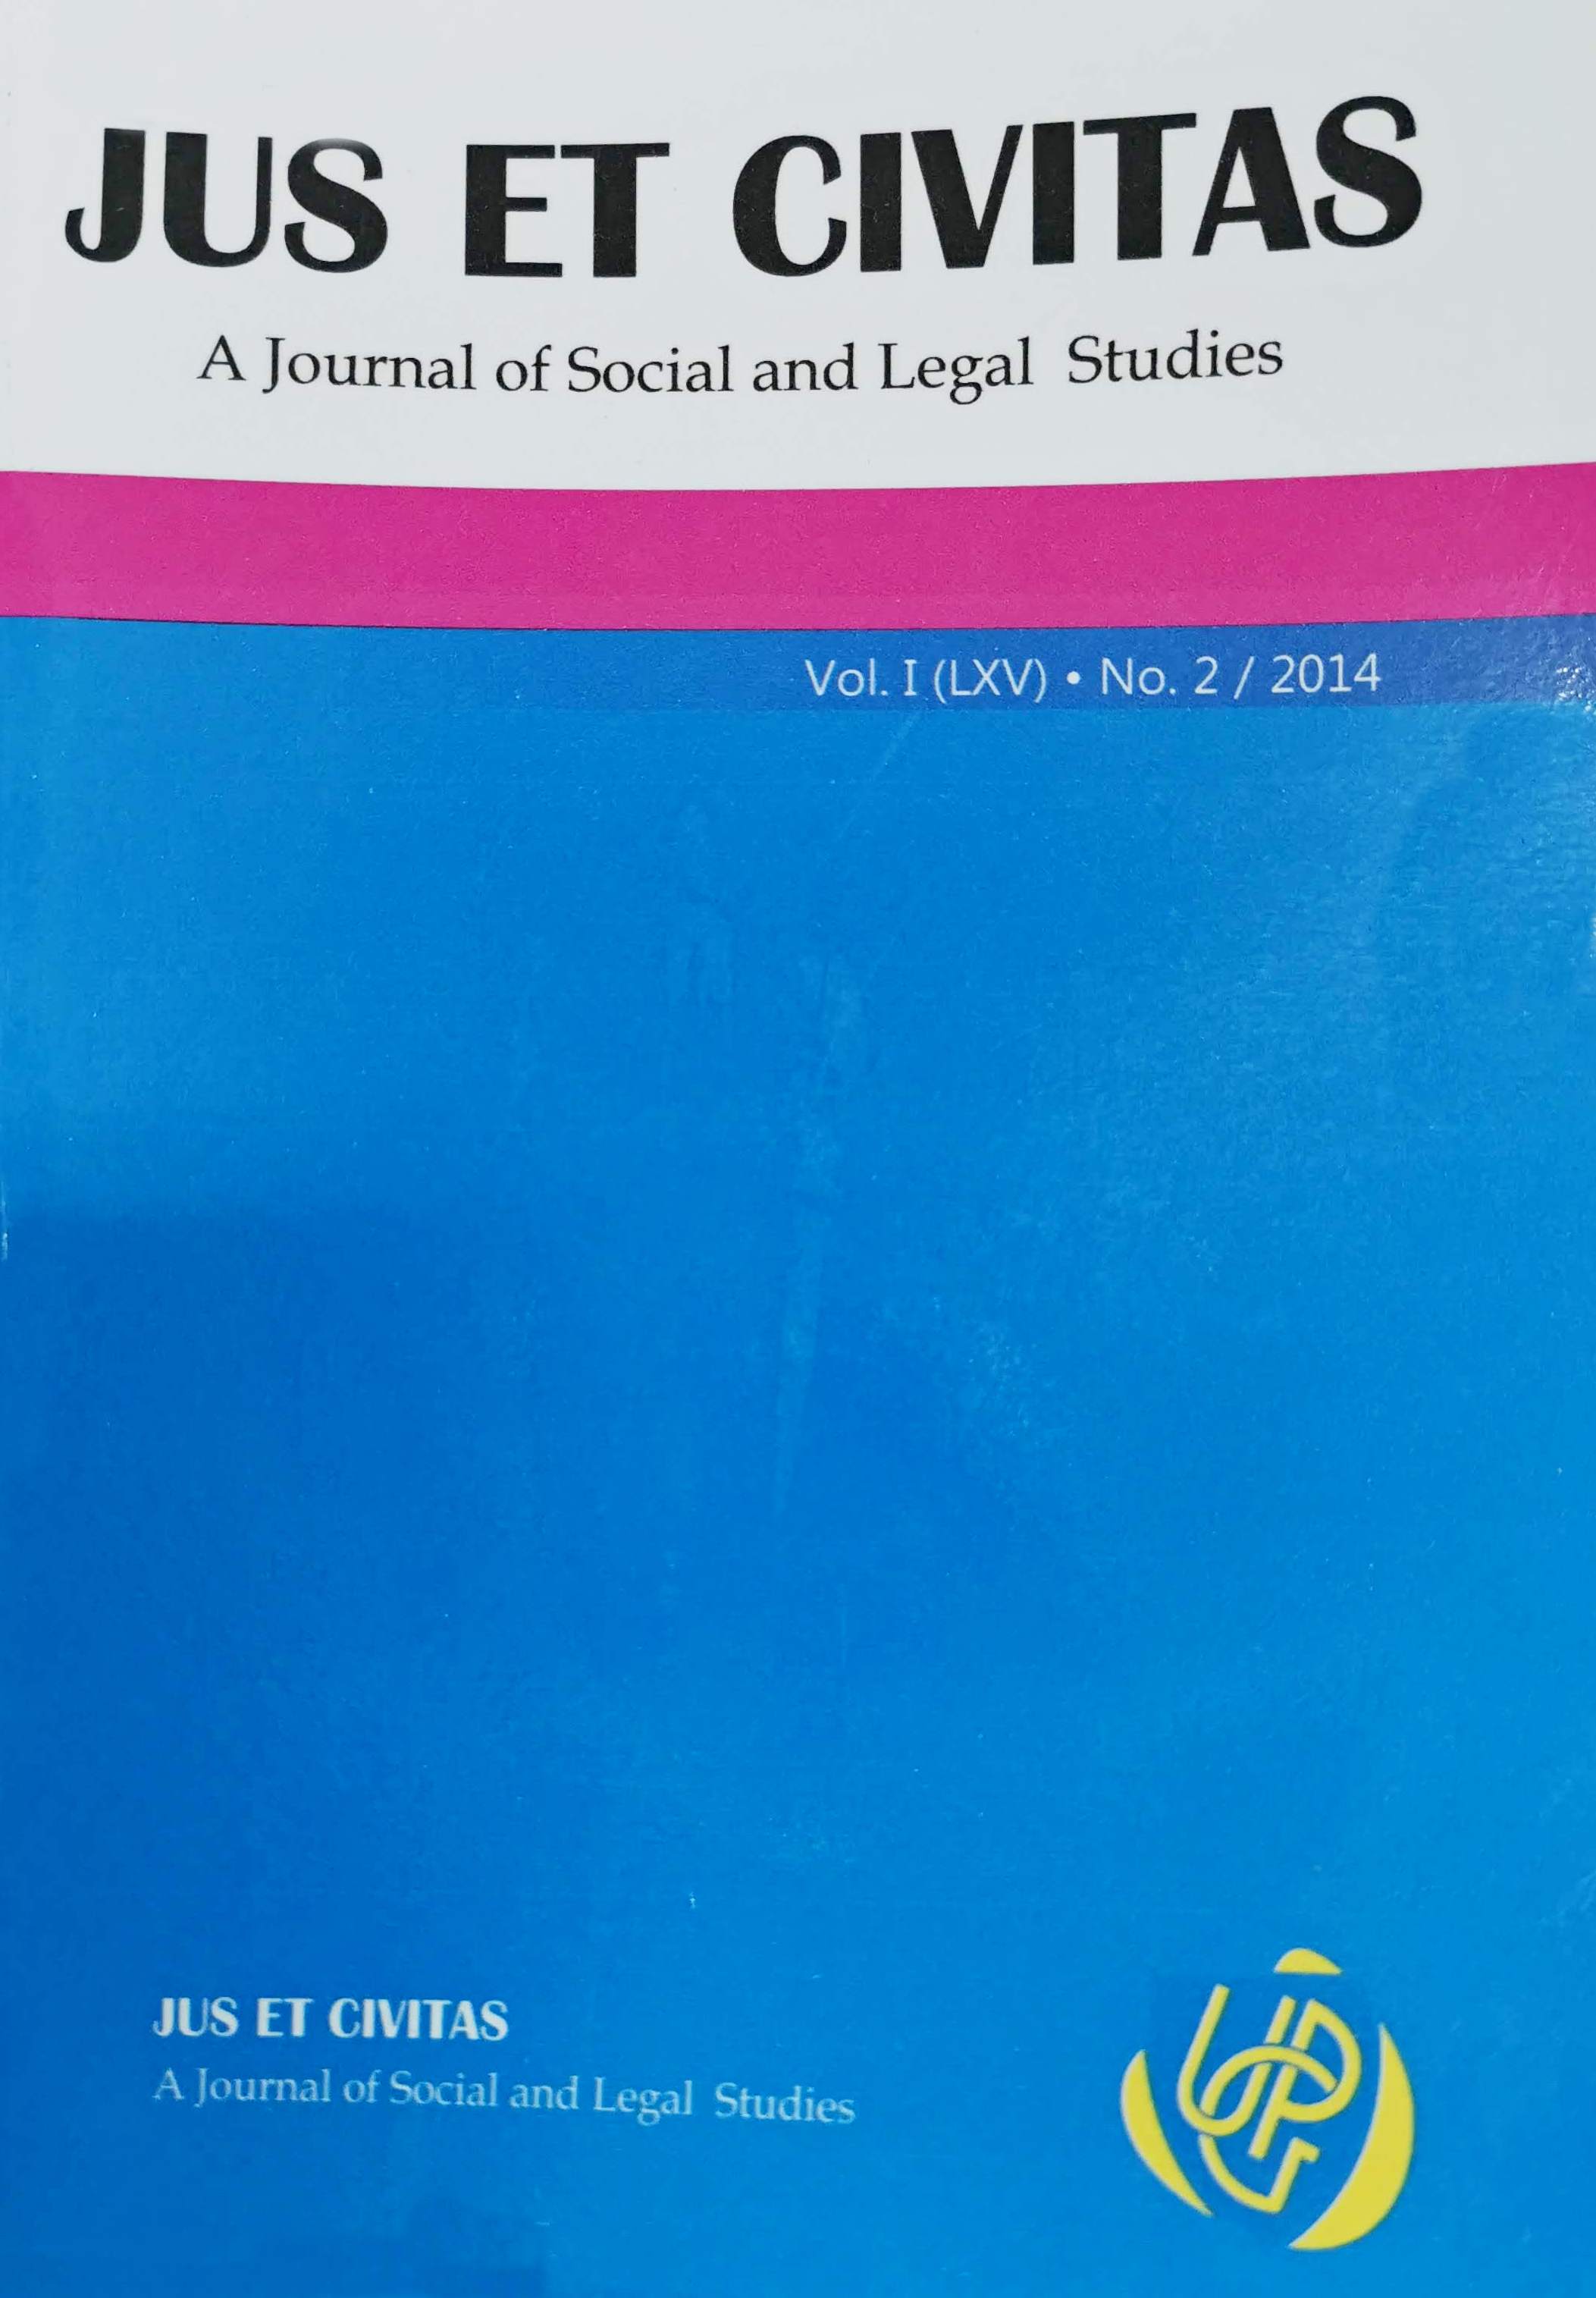 THE MINOR’S JUDGMENT ASSUMPTION IN CIVIL AND CRIMINAL LAW IN REGARD TO THE AGE LIMITS ESTABLISHED BY THE LAWMAKER Cover Image